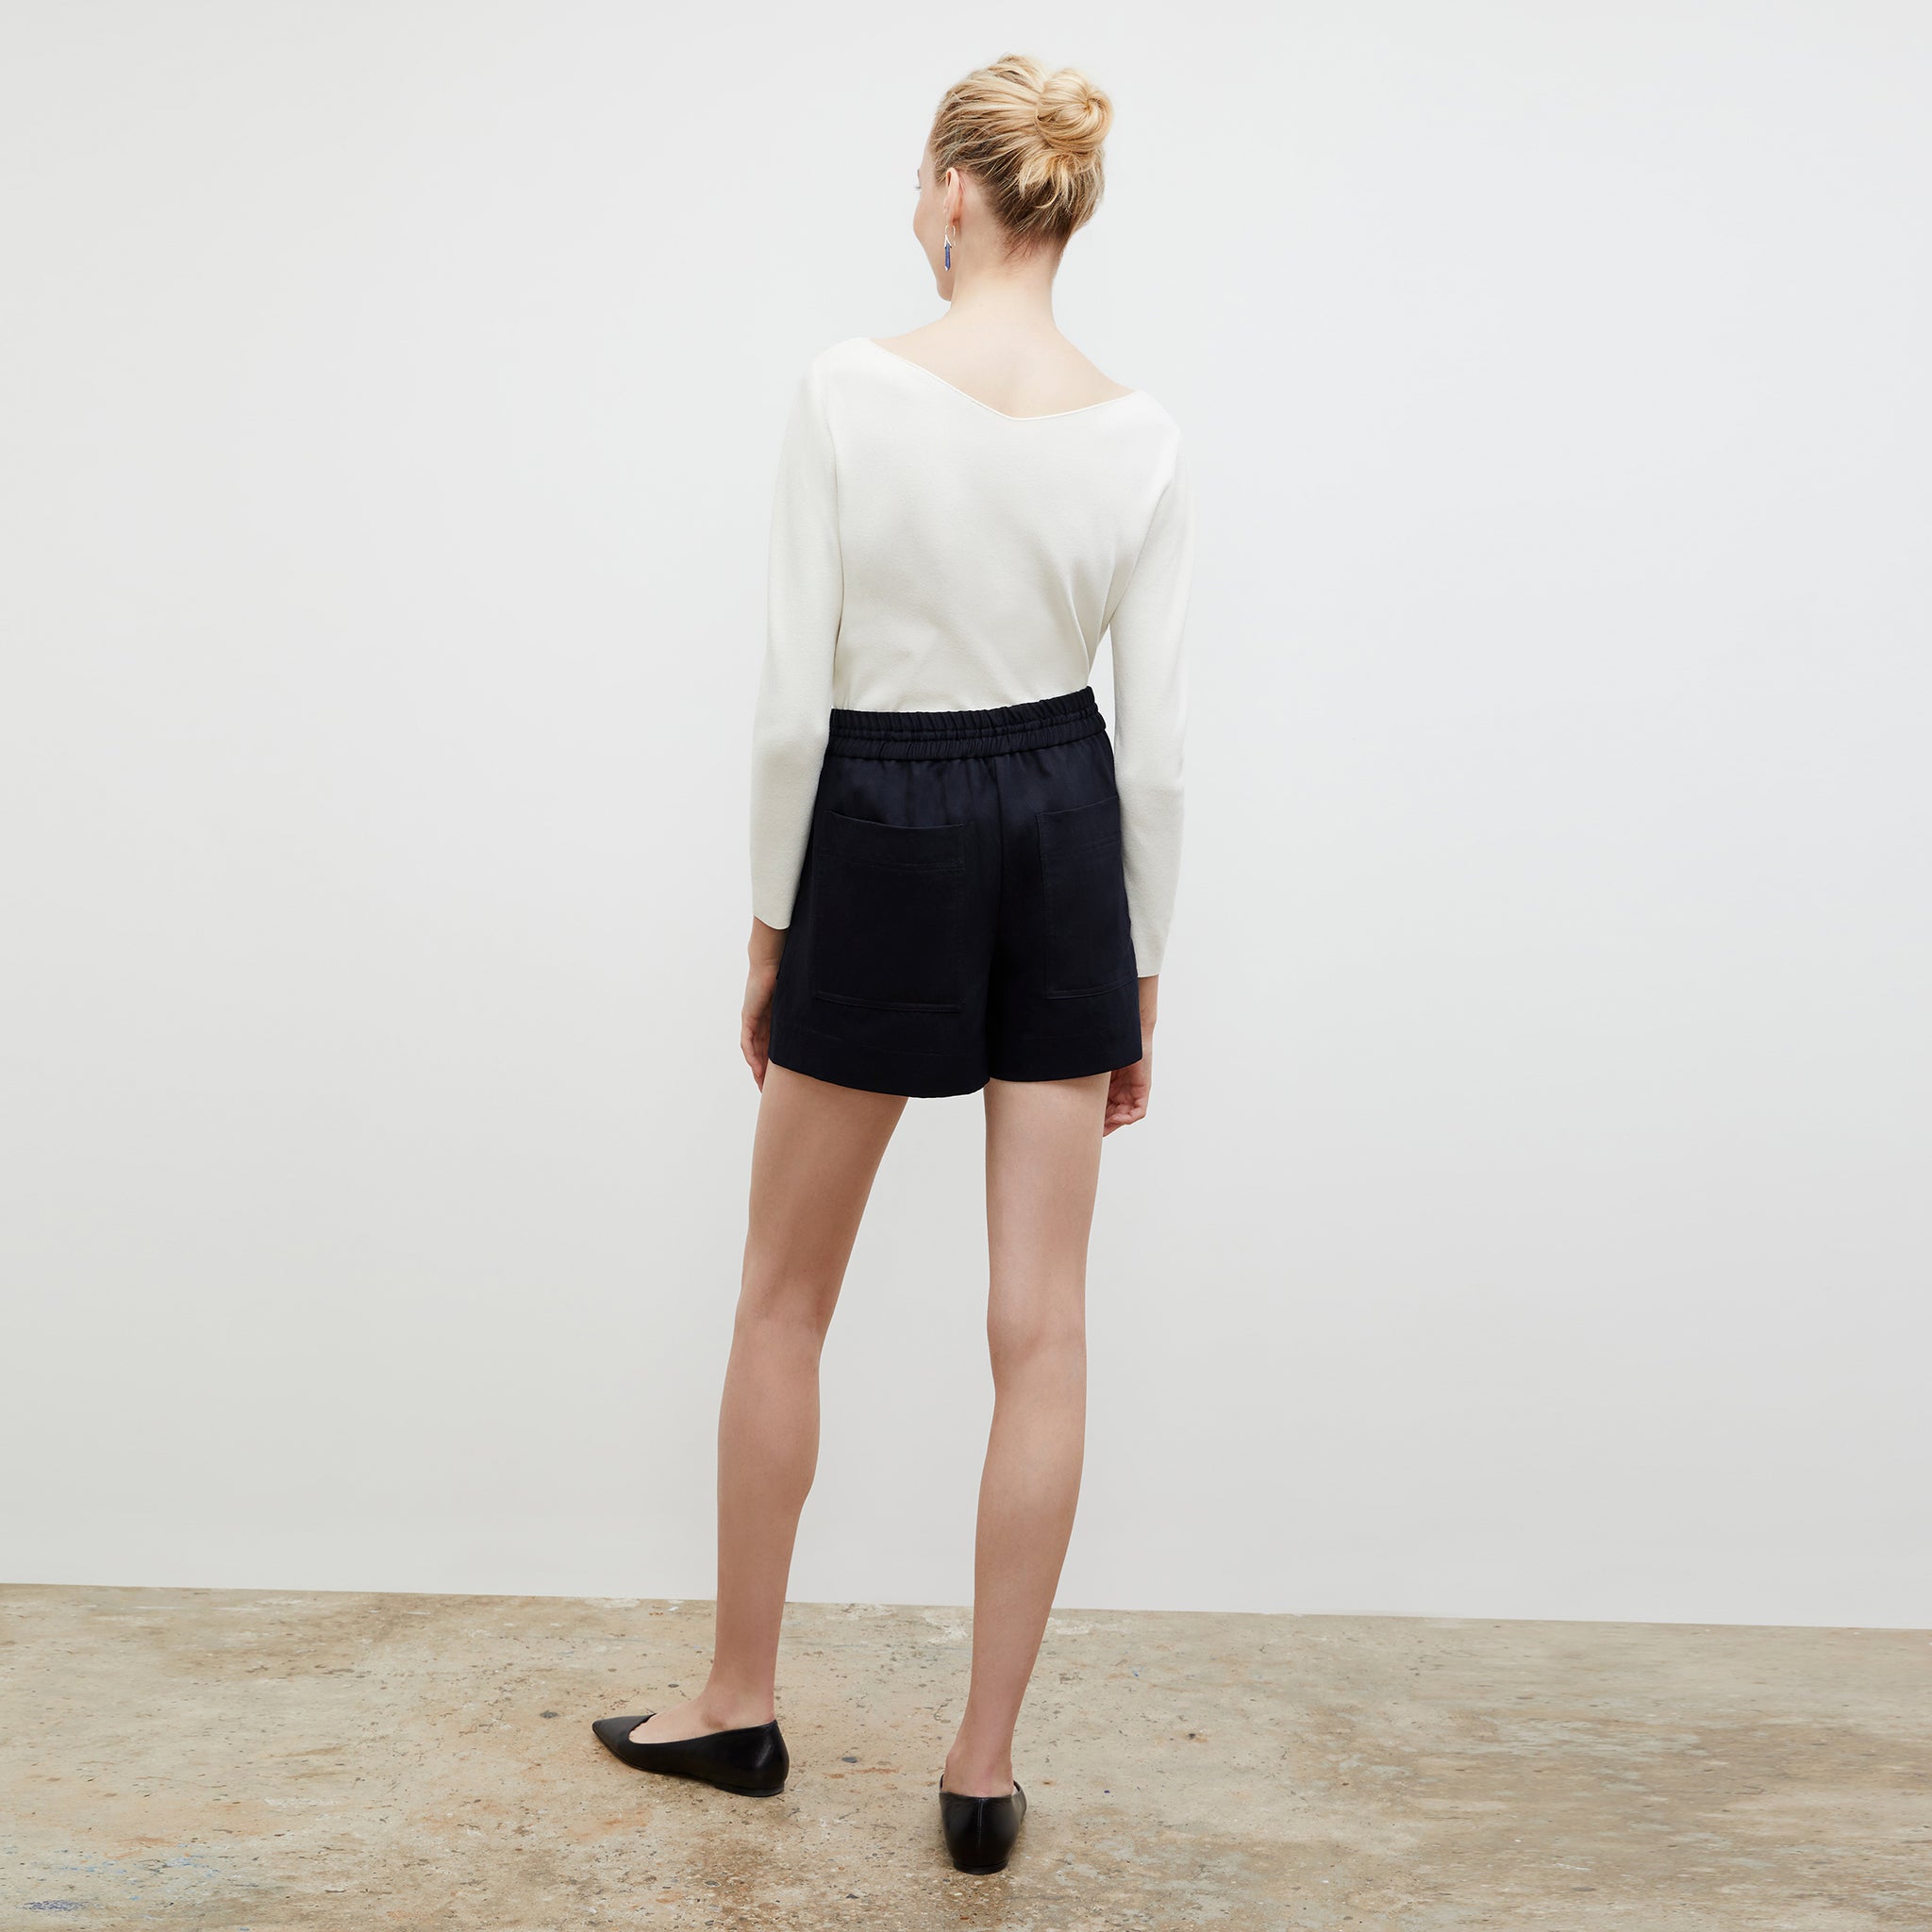 Back image of a woman standing wearing the celeste top in ivory